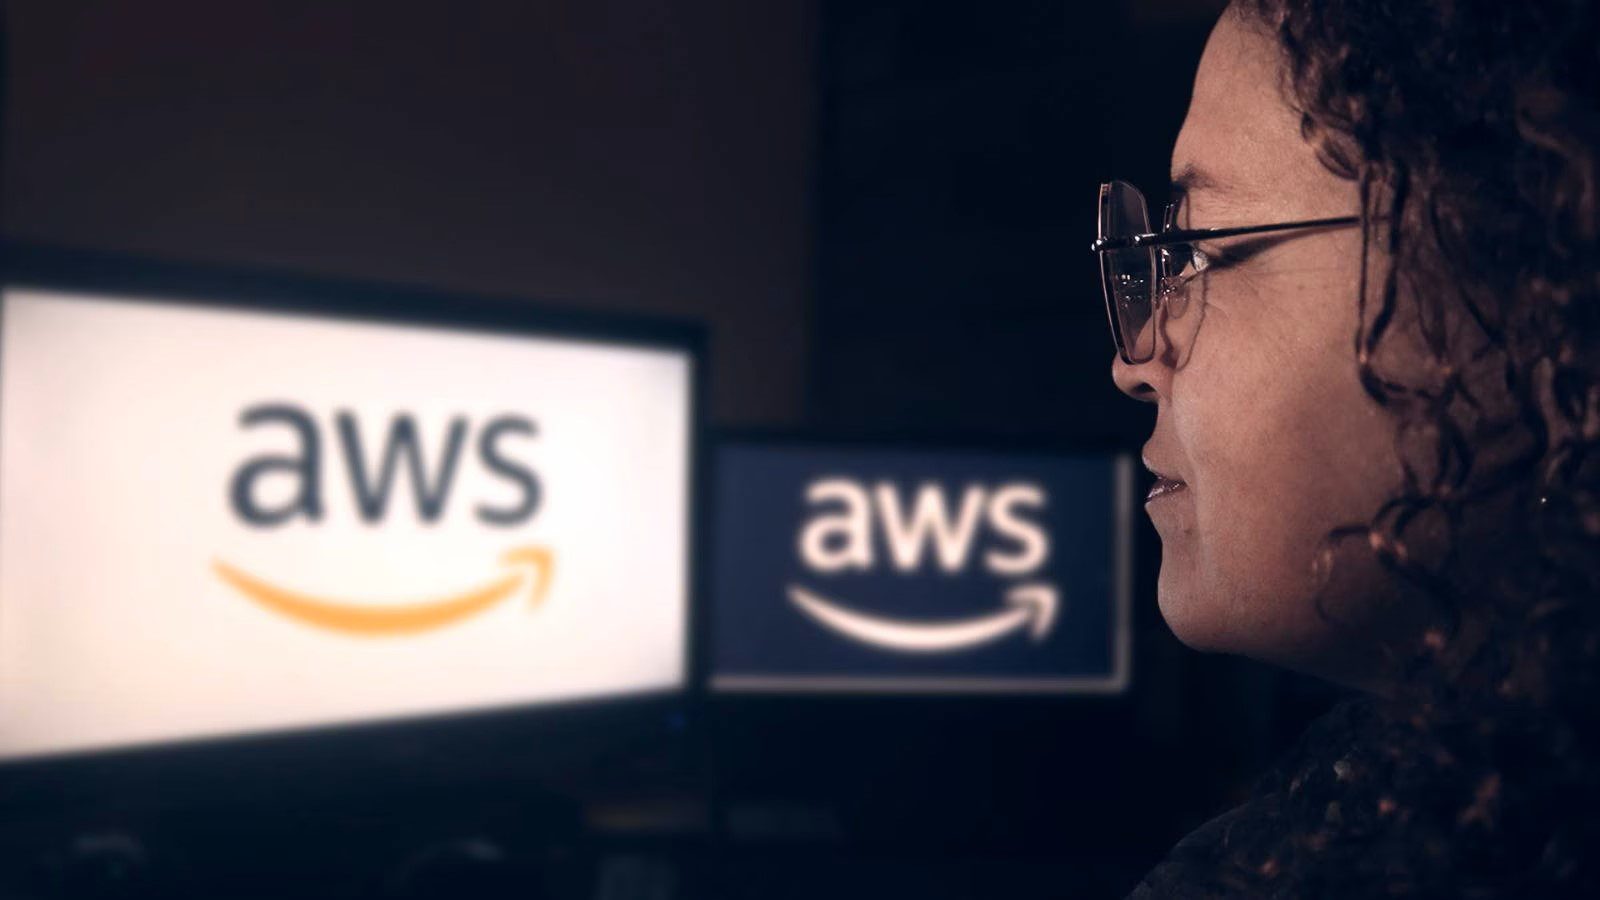 A woman wearing glasses gazes at an AWS logo displayed on a computer screen